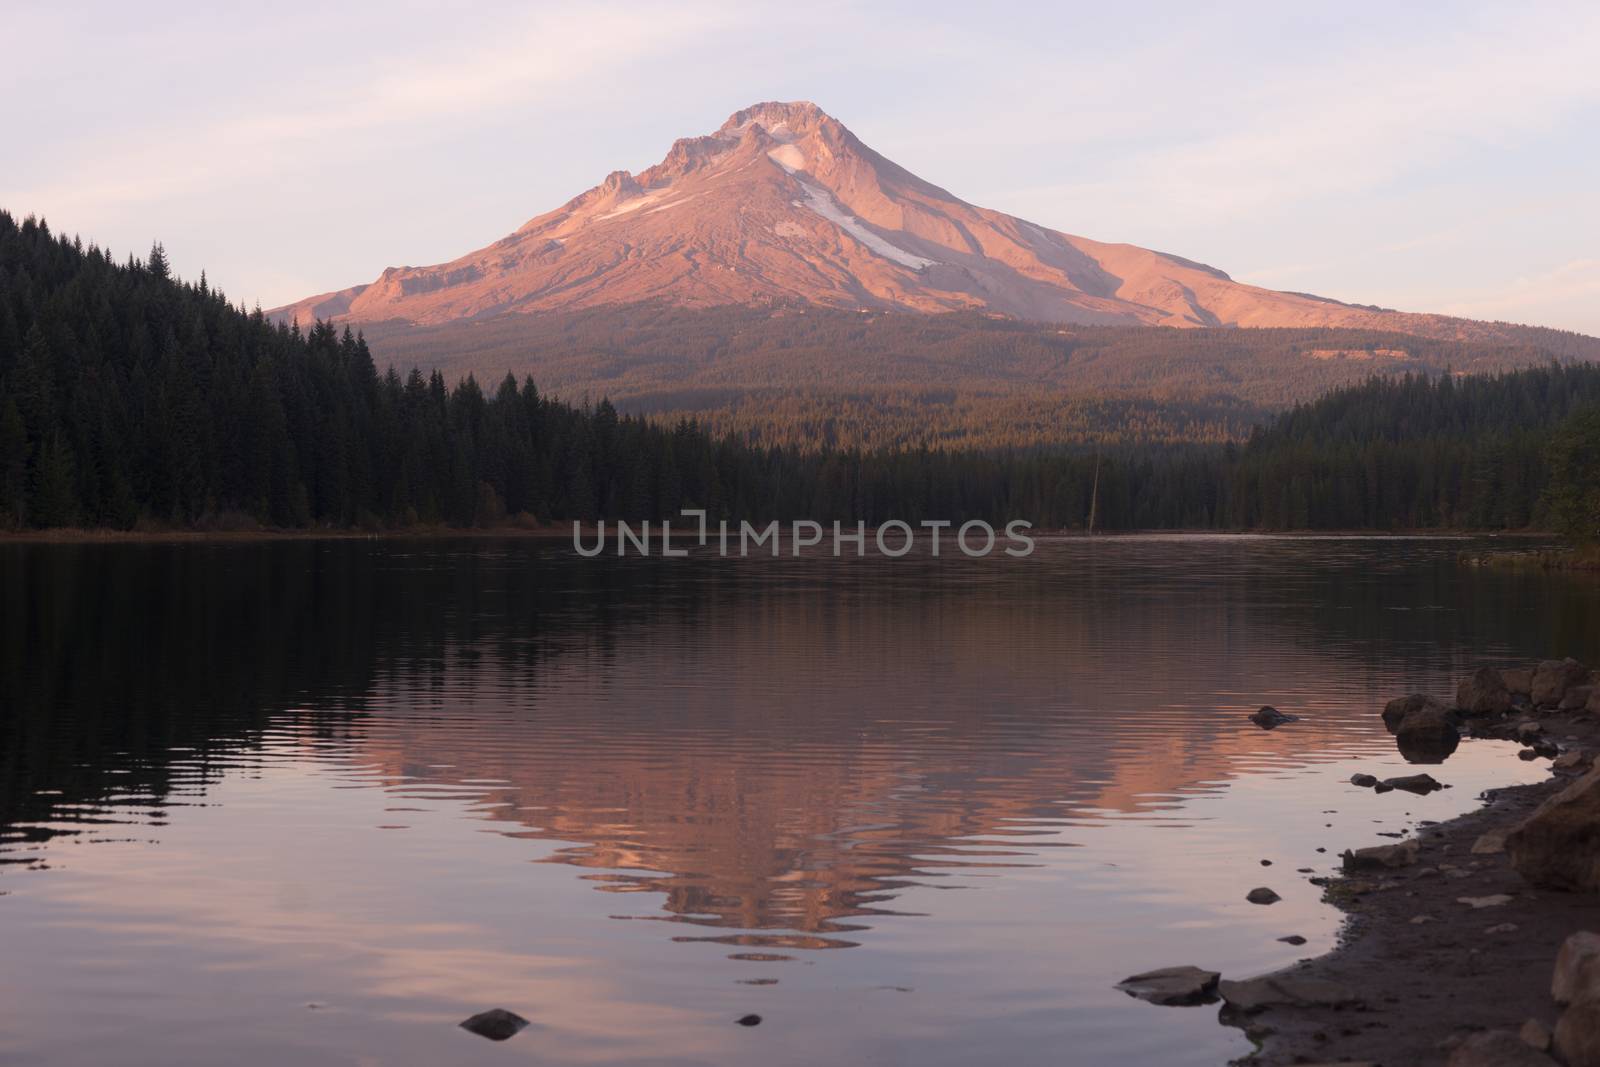 Mt Hood Smooth Reflection Trillium Lake Oregon Territory by ChrisBoswell